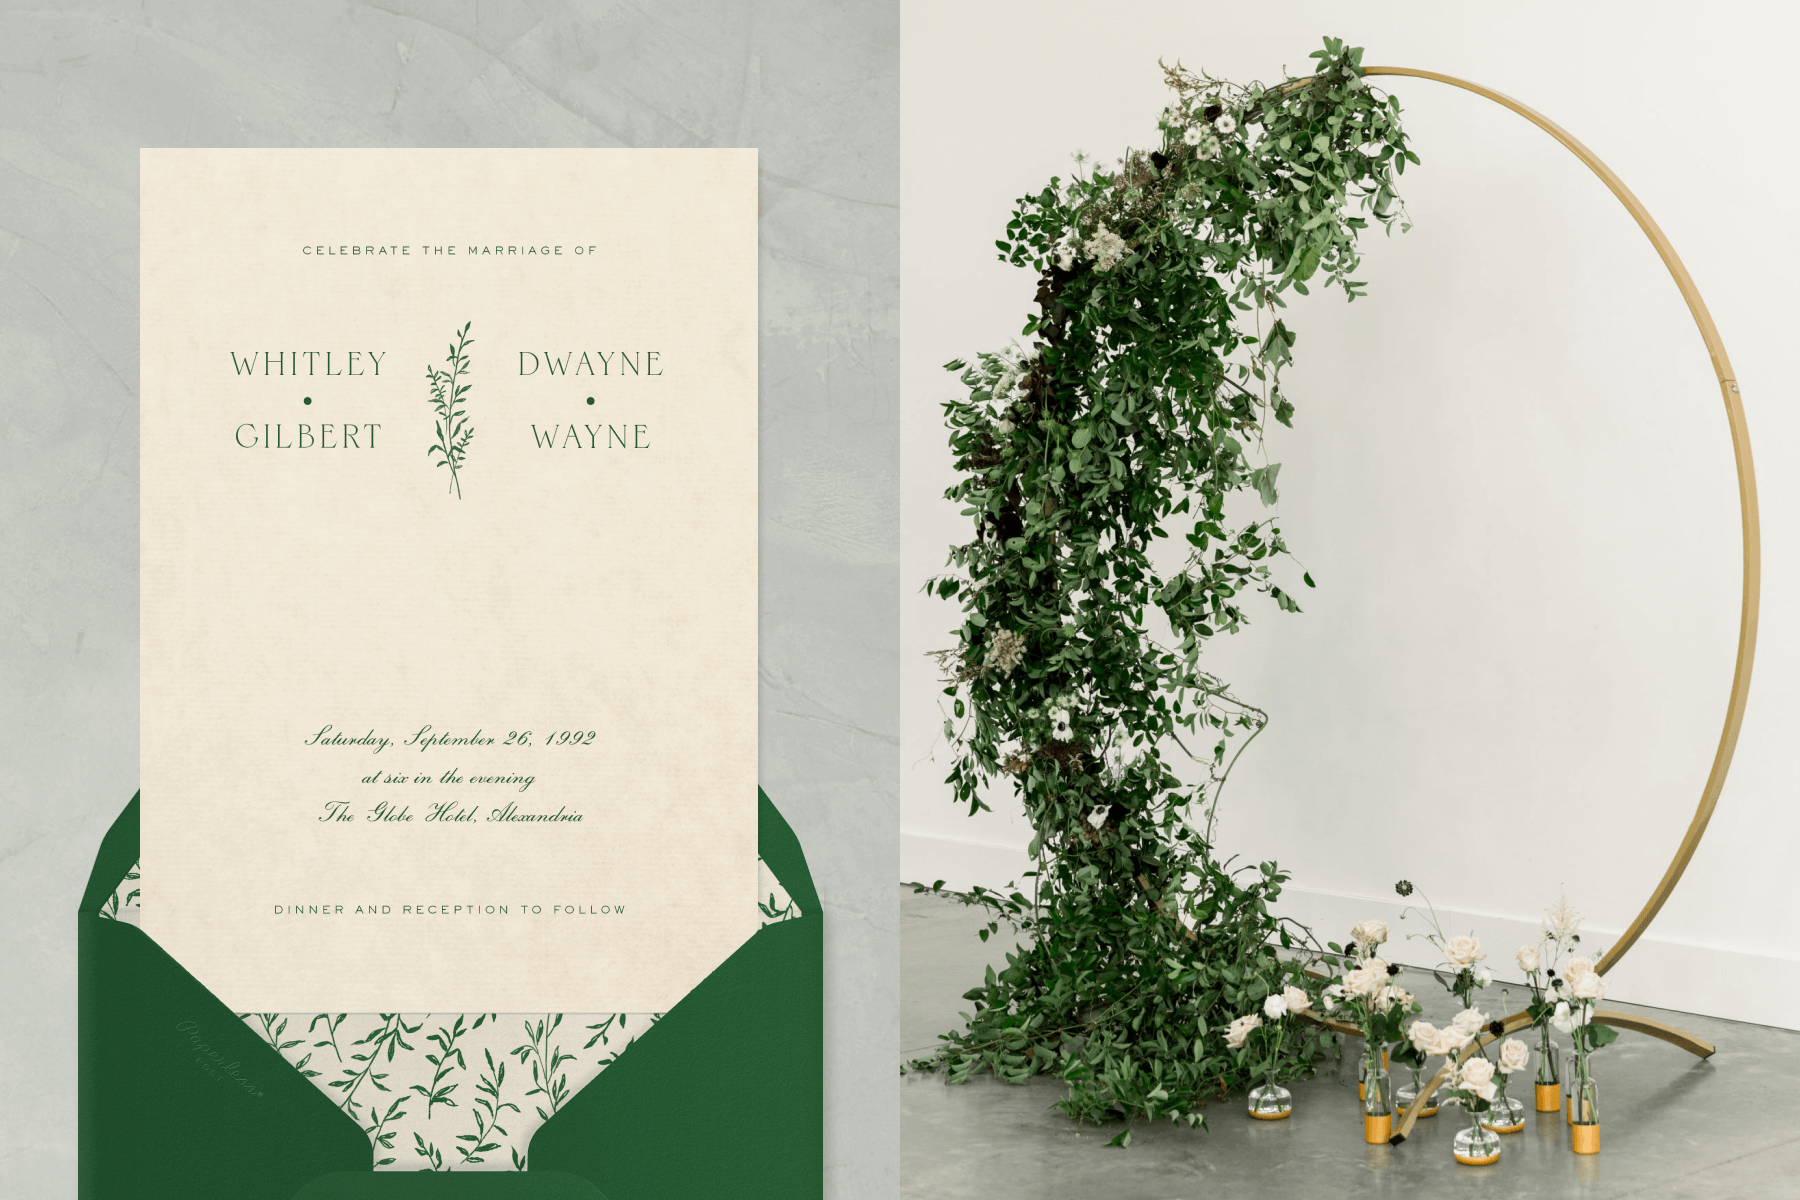 Left: A cream wedding invitation with a small green sprig between the couple’s names and a matching green envelope. Right: A gold wedding arch with tangled greenery and white flowers cascading down one side.